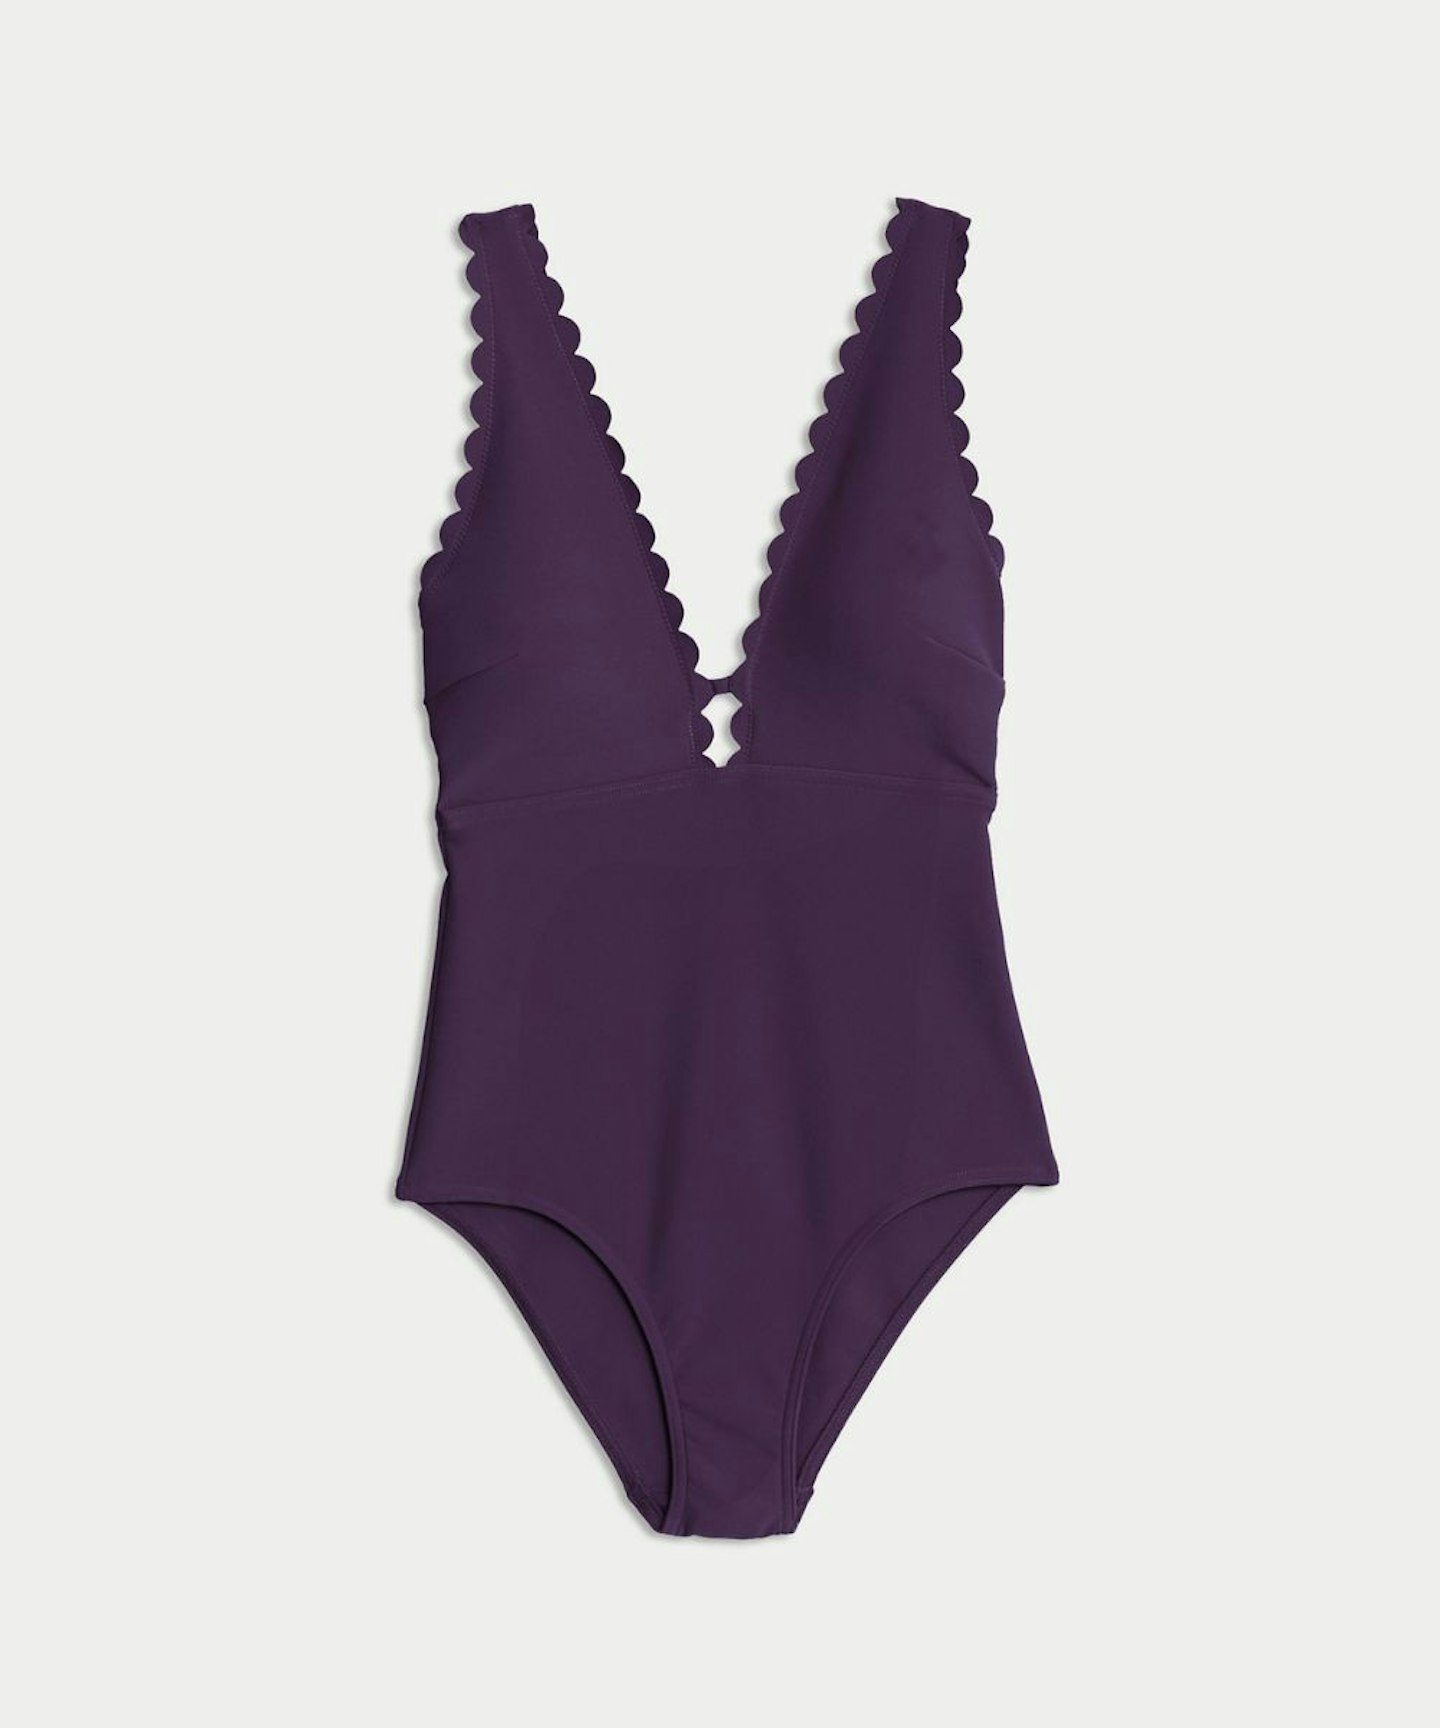 M&S, Padded Scallop Plunge Swimsuit